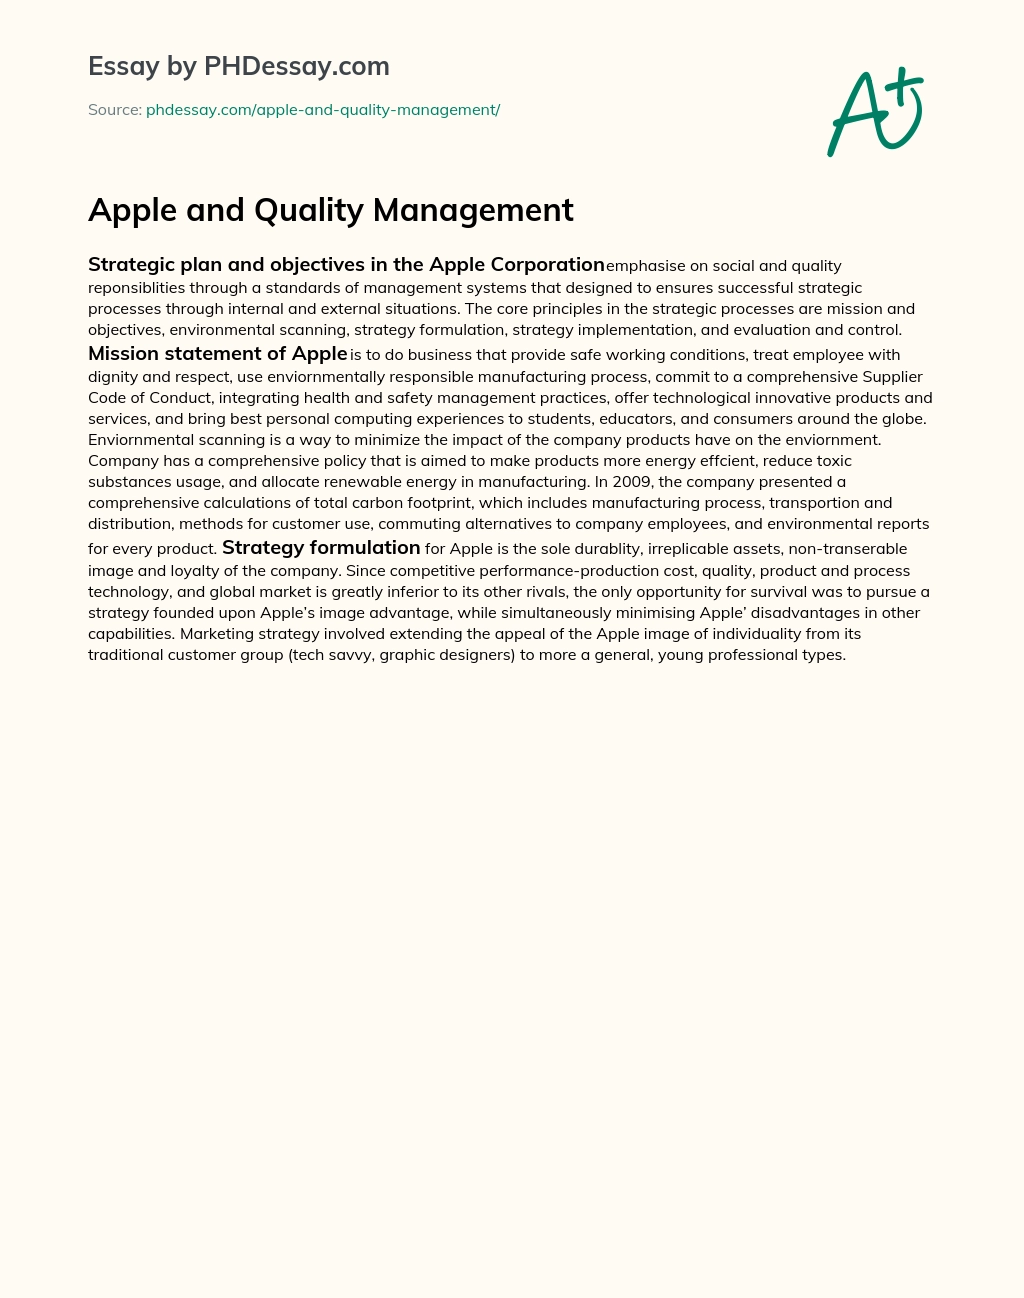 Apple and Quality Management essay